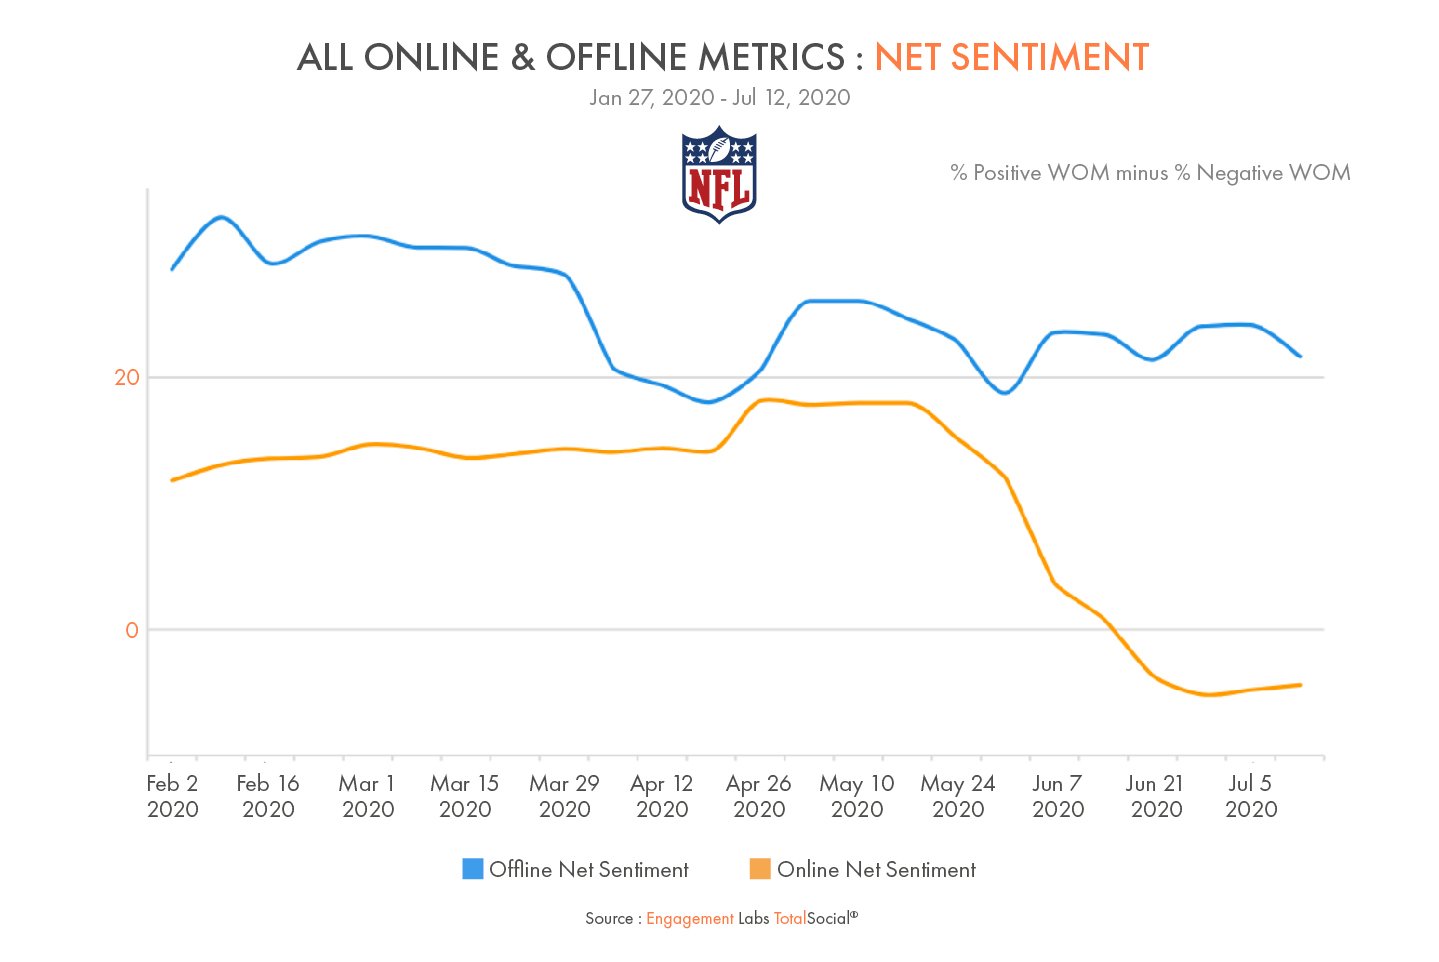 NFL CONVERSATION TURNS NEGATIVE ONLY IN SOCIAL MEDIA